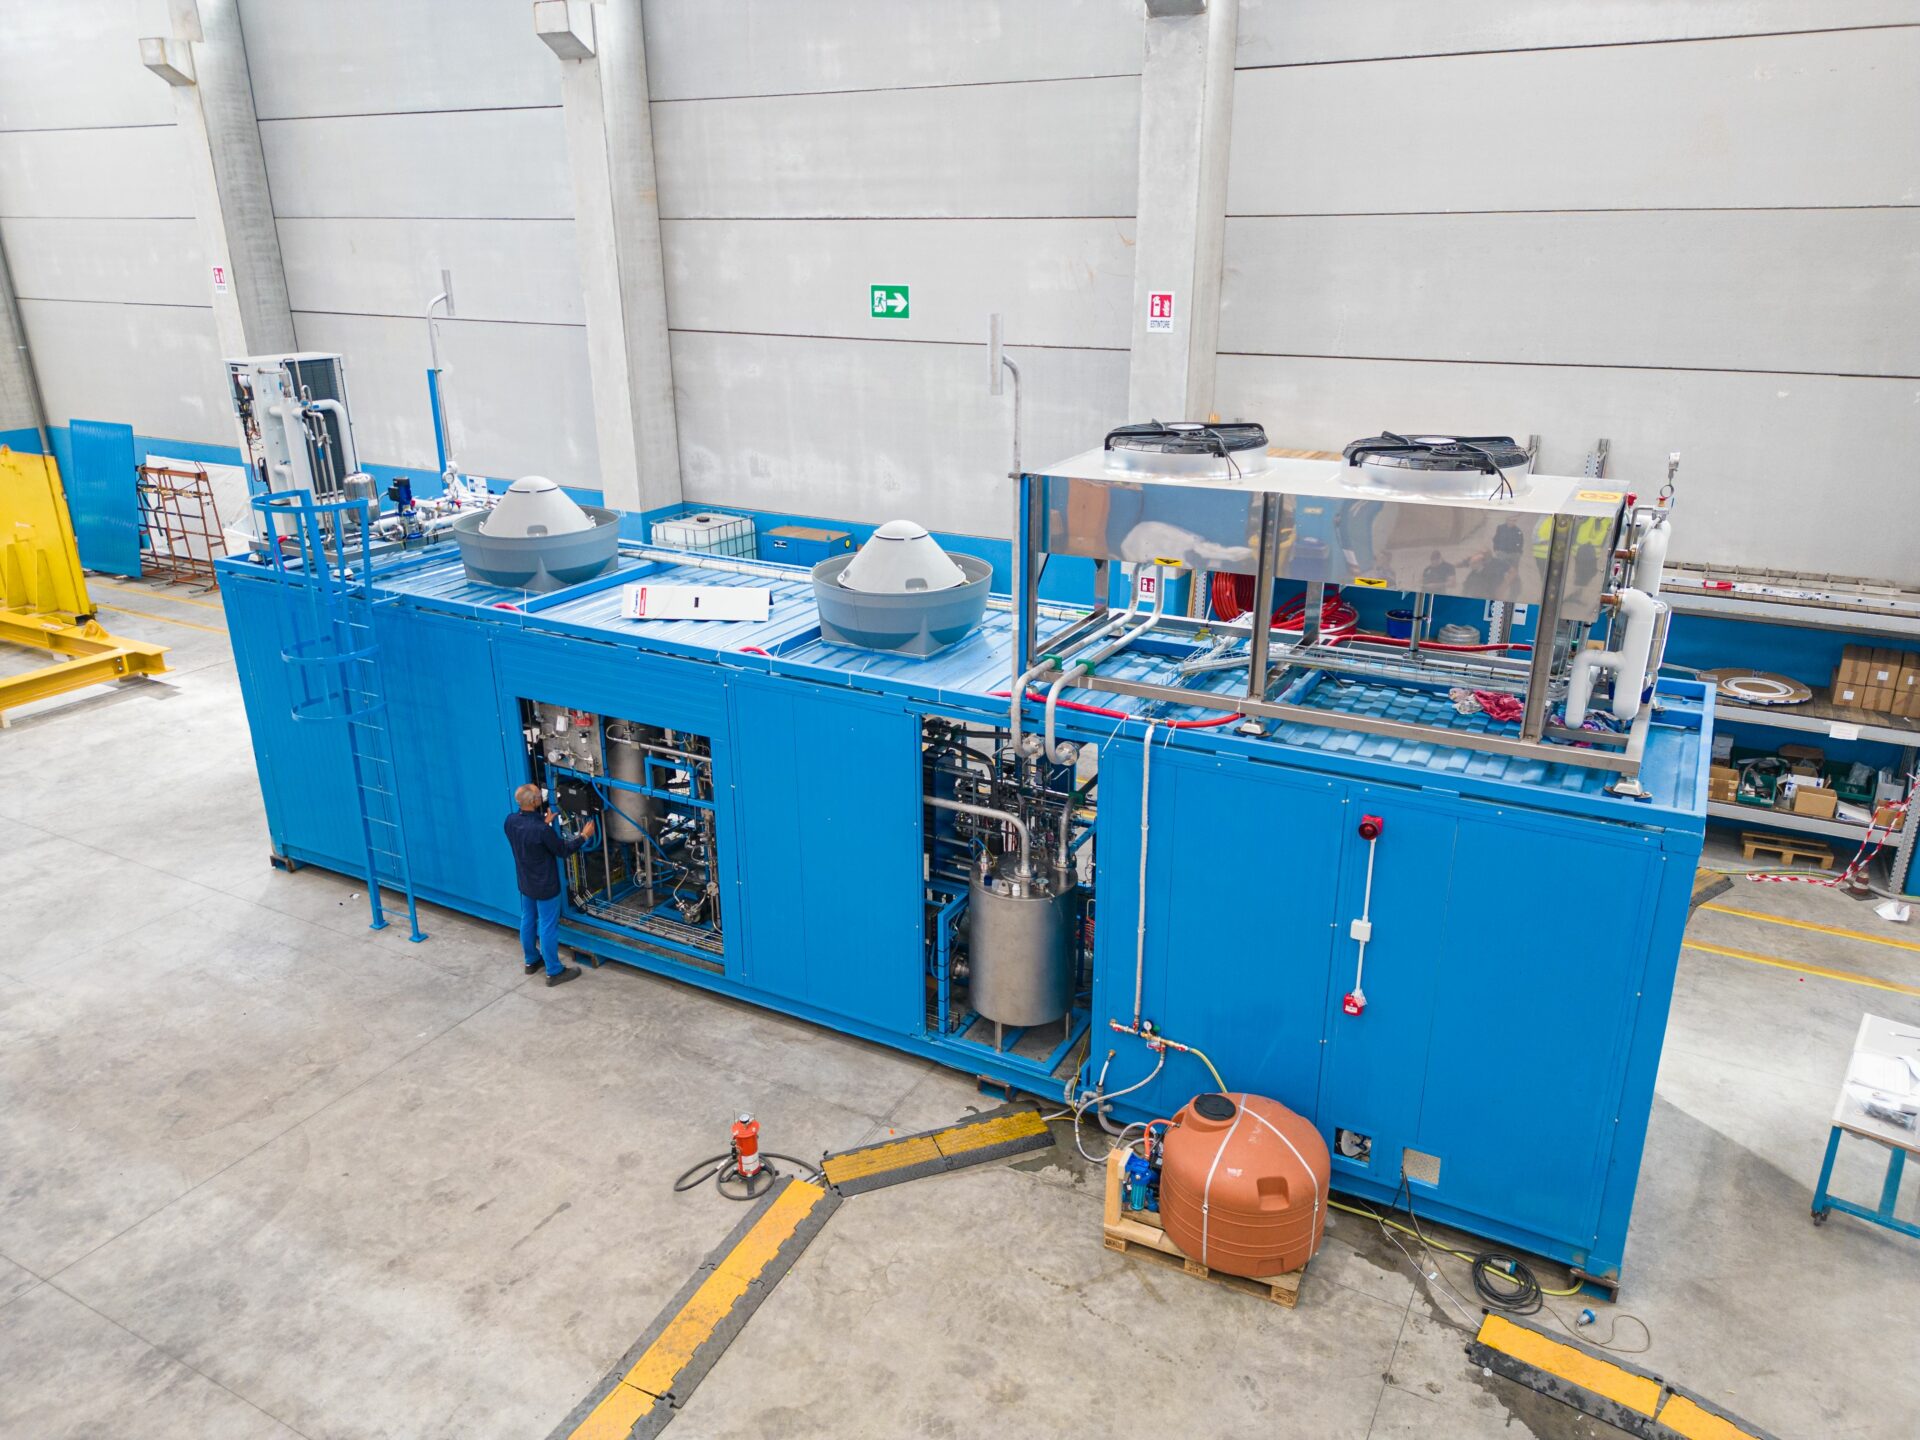 IMI Critical Engineering Completes First Pilot Test for Green Hydrogen Generation Ahead of Series of European Electrolyser Installations